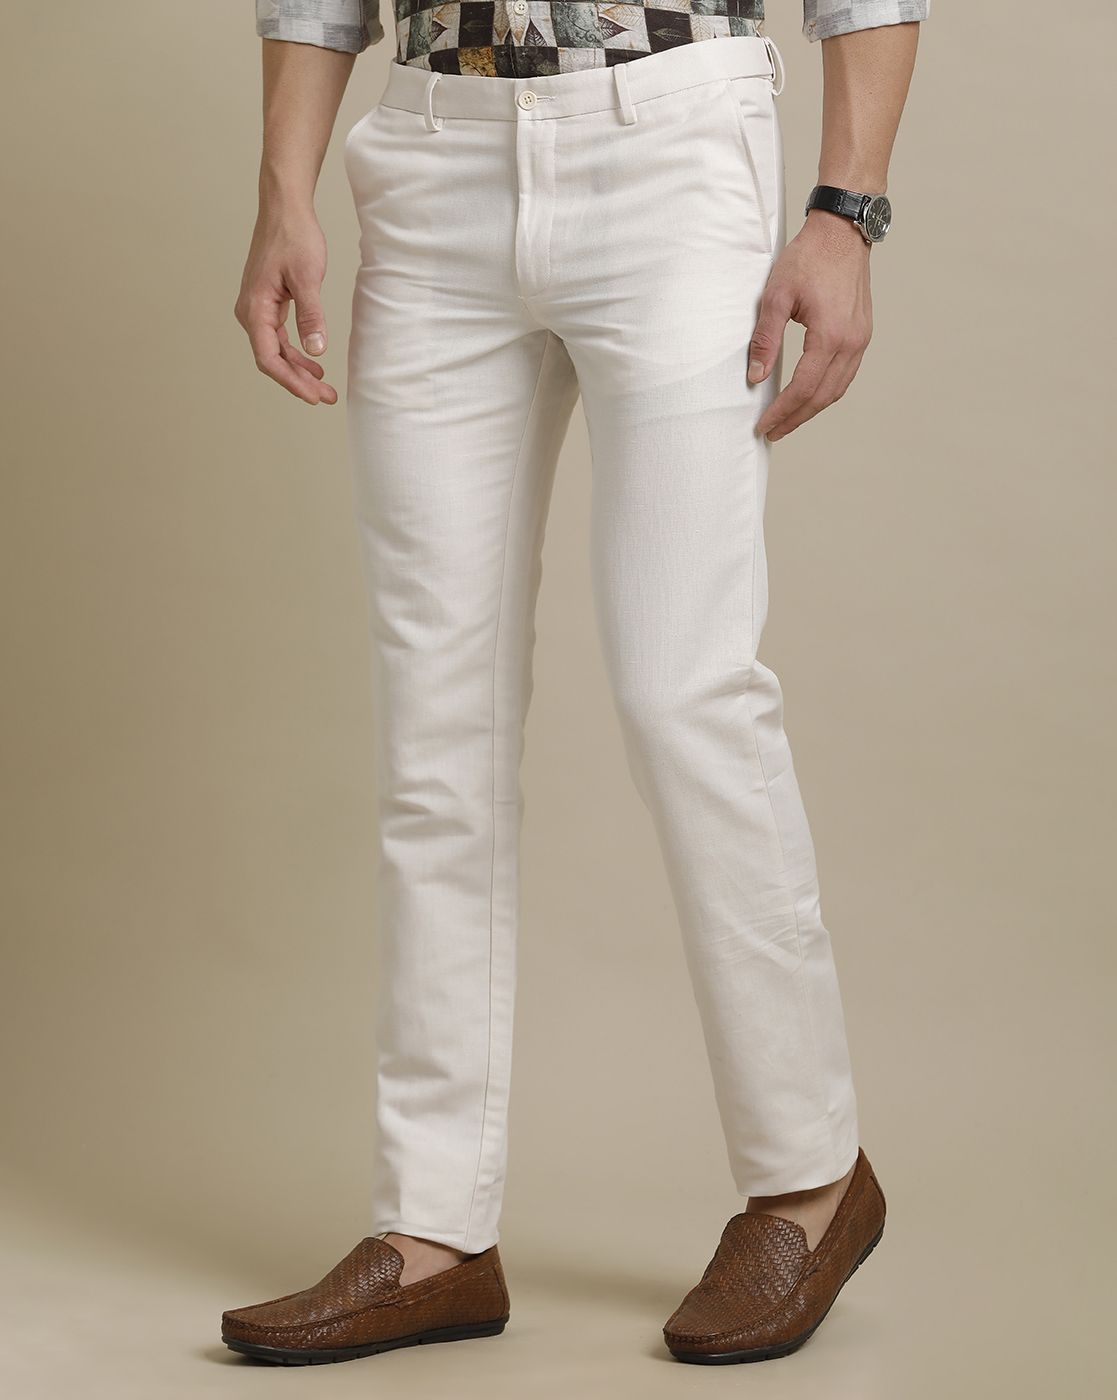 Buy Jugend Men Beige Solid Slim fit Wrinkle free Chinos Online at Low  Prices in India - Paytmmall.com